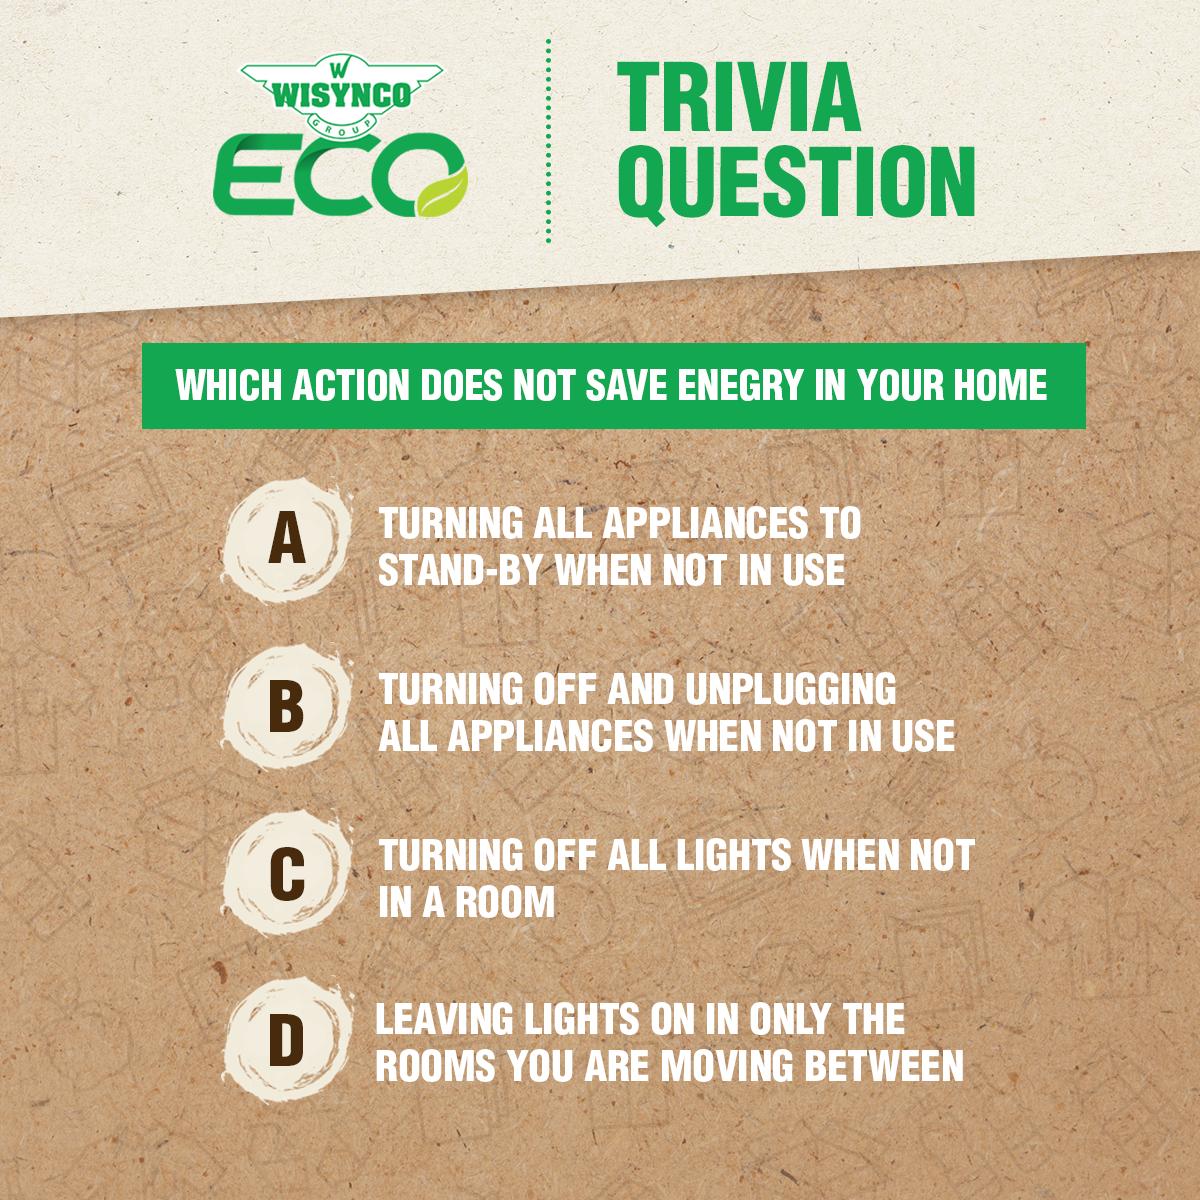 #RecyclingPlasticFeelsFantastic ♻  Do you know the answer? Comment your answer below and WIN a Wisynco ECO Bag. #Wisynco
#WisyncoECO #ECOQuiz